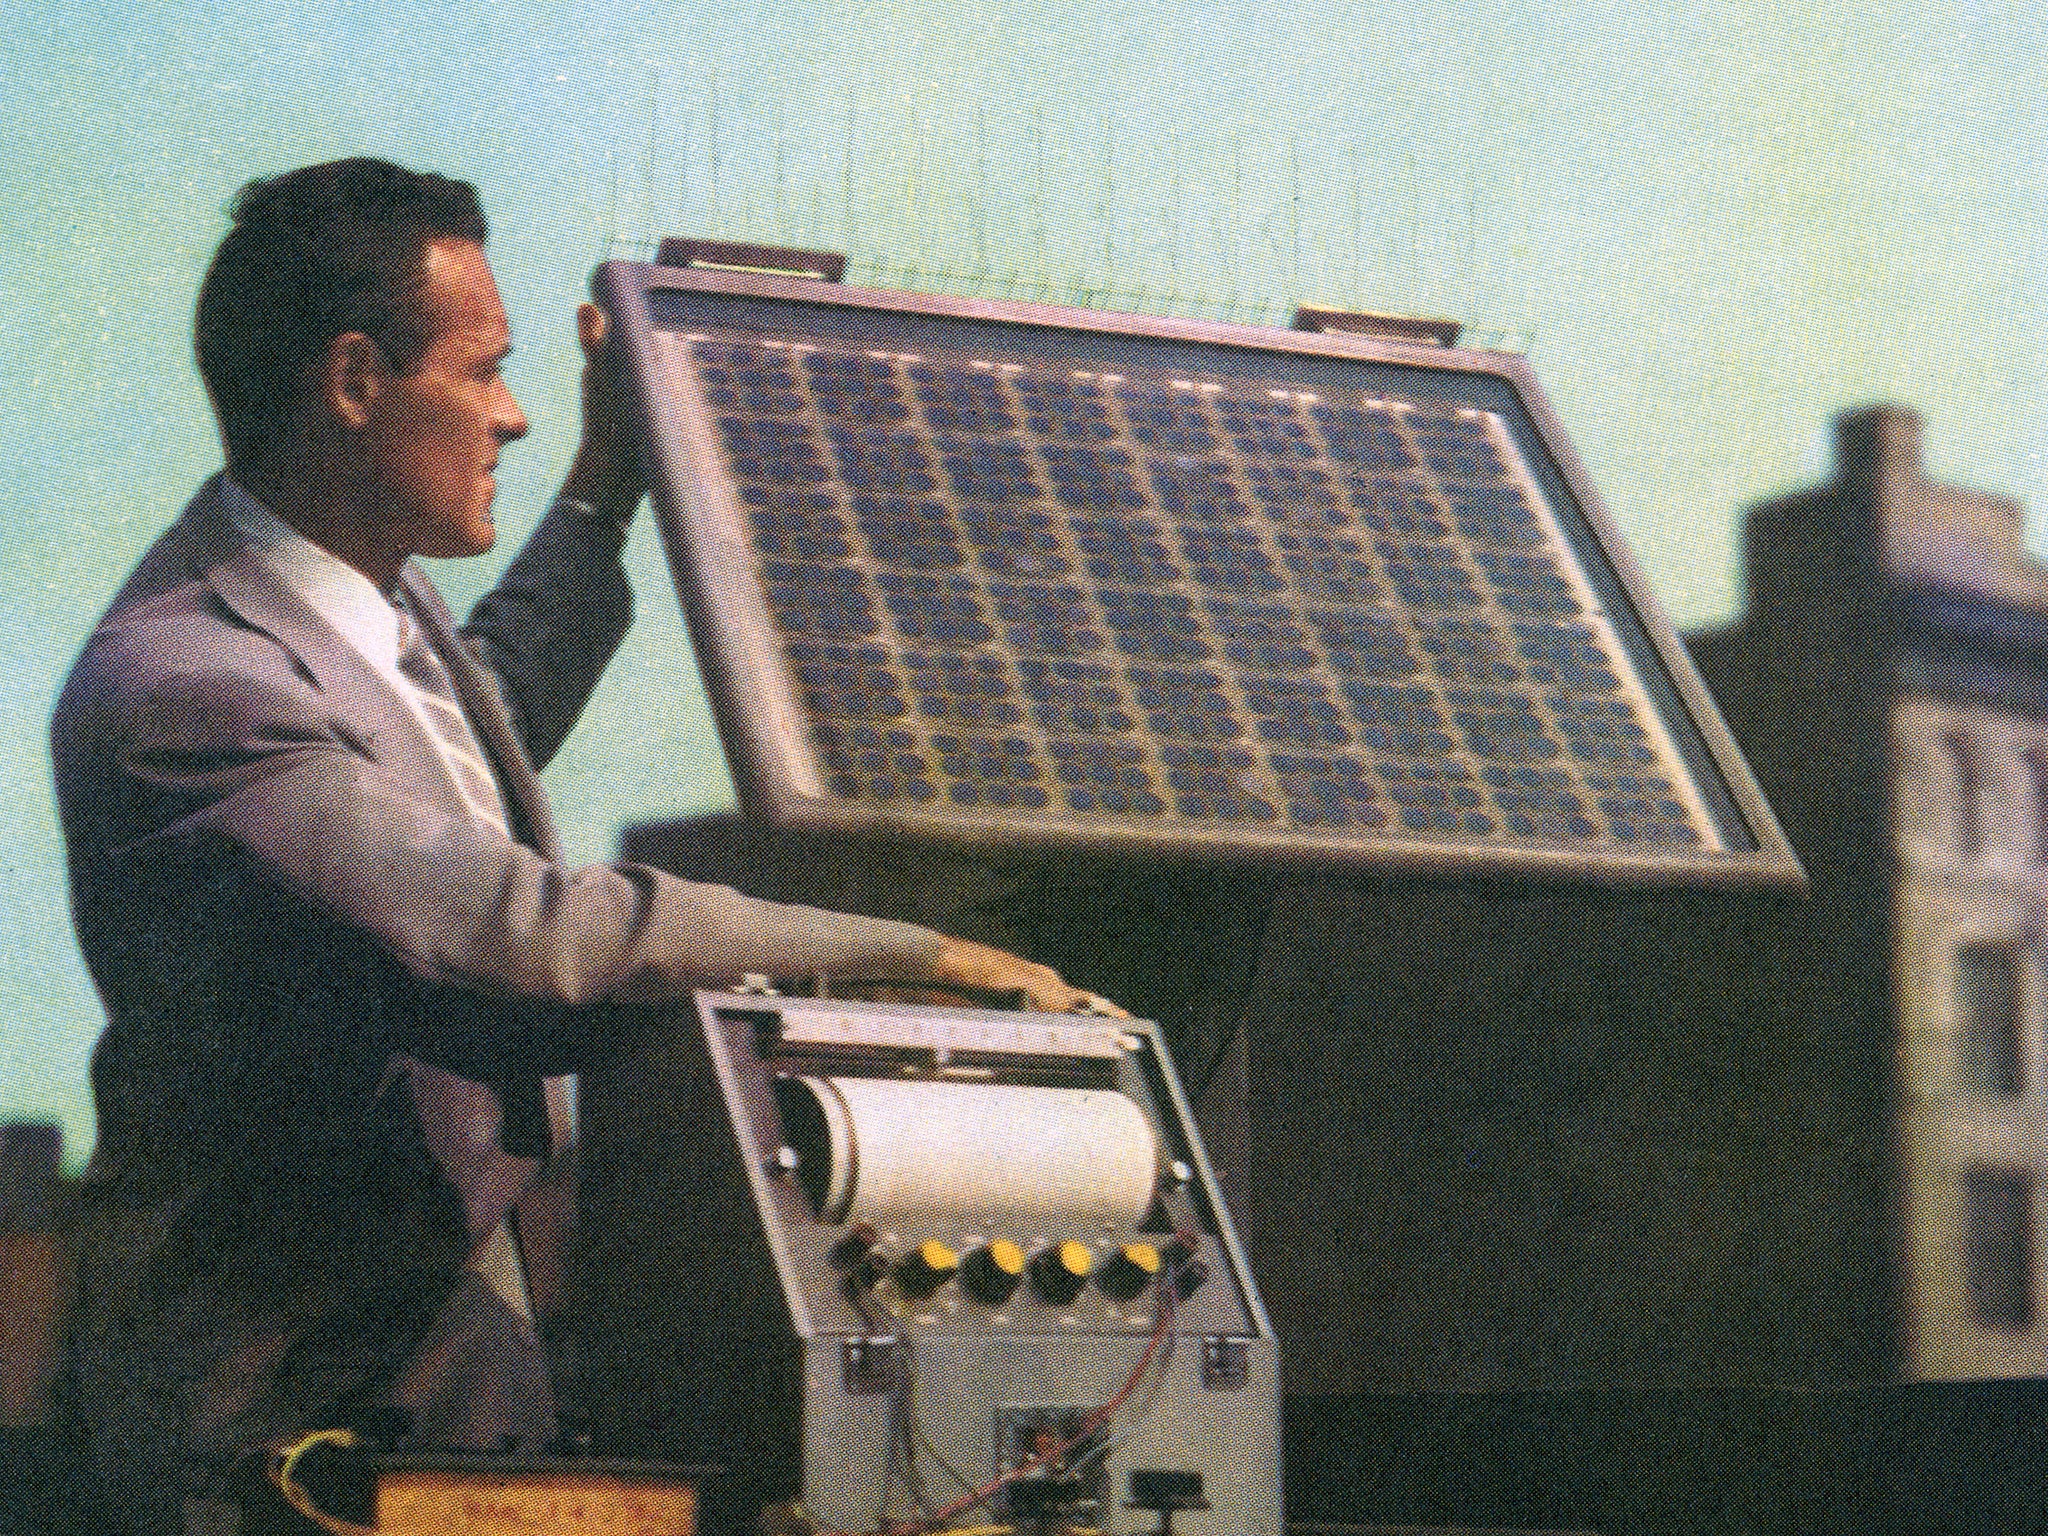 The installation of the first successful solar panel and battery for the Georgia telephone carrier Americus in October 1955